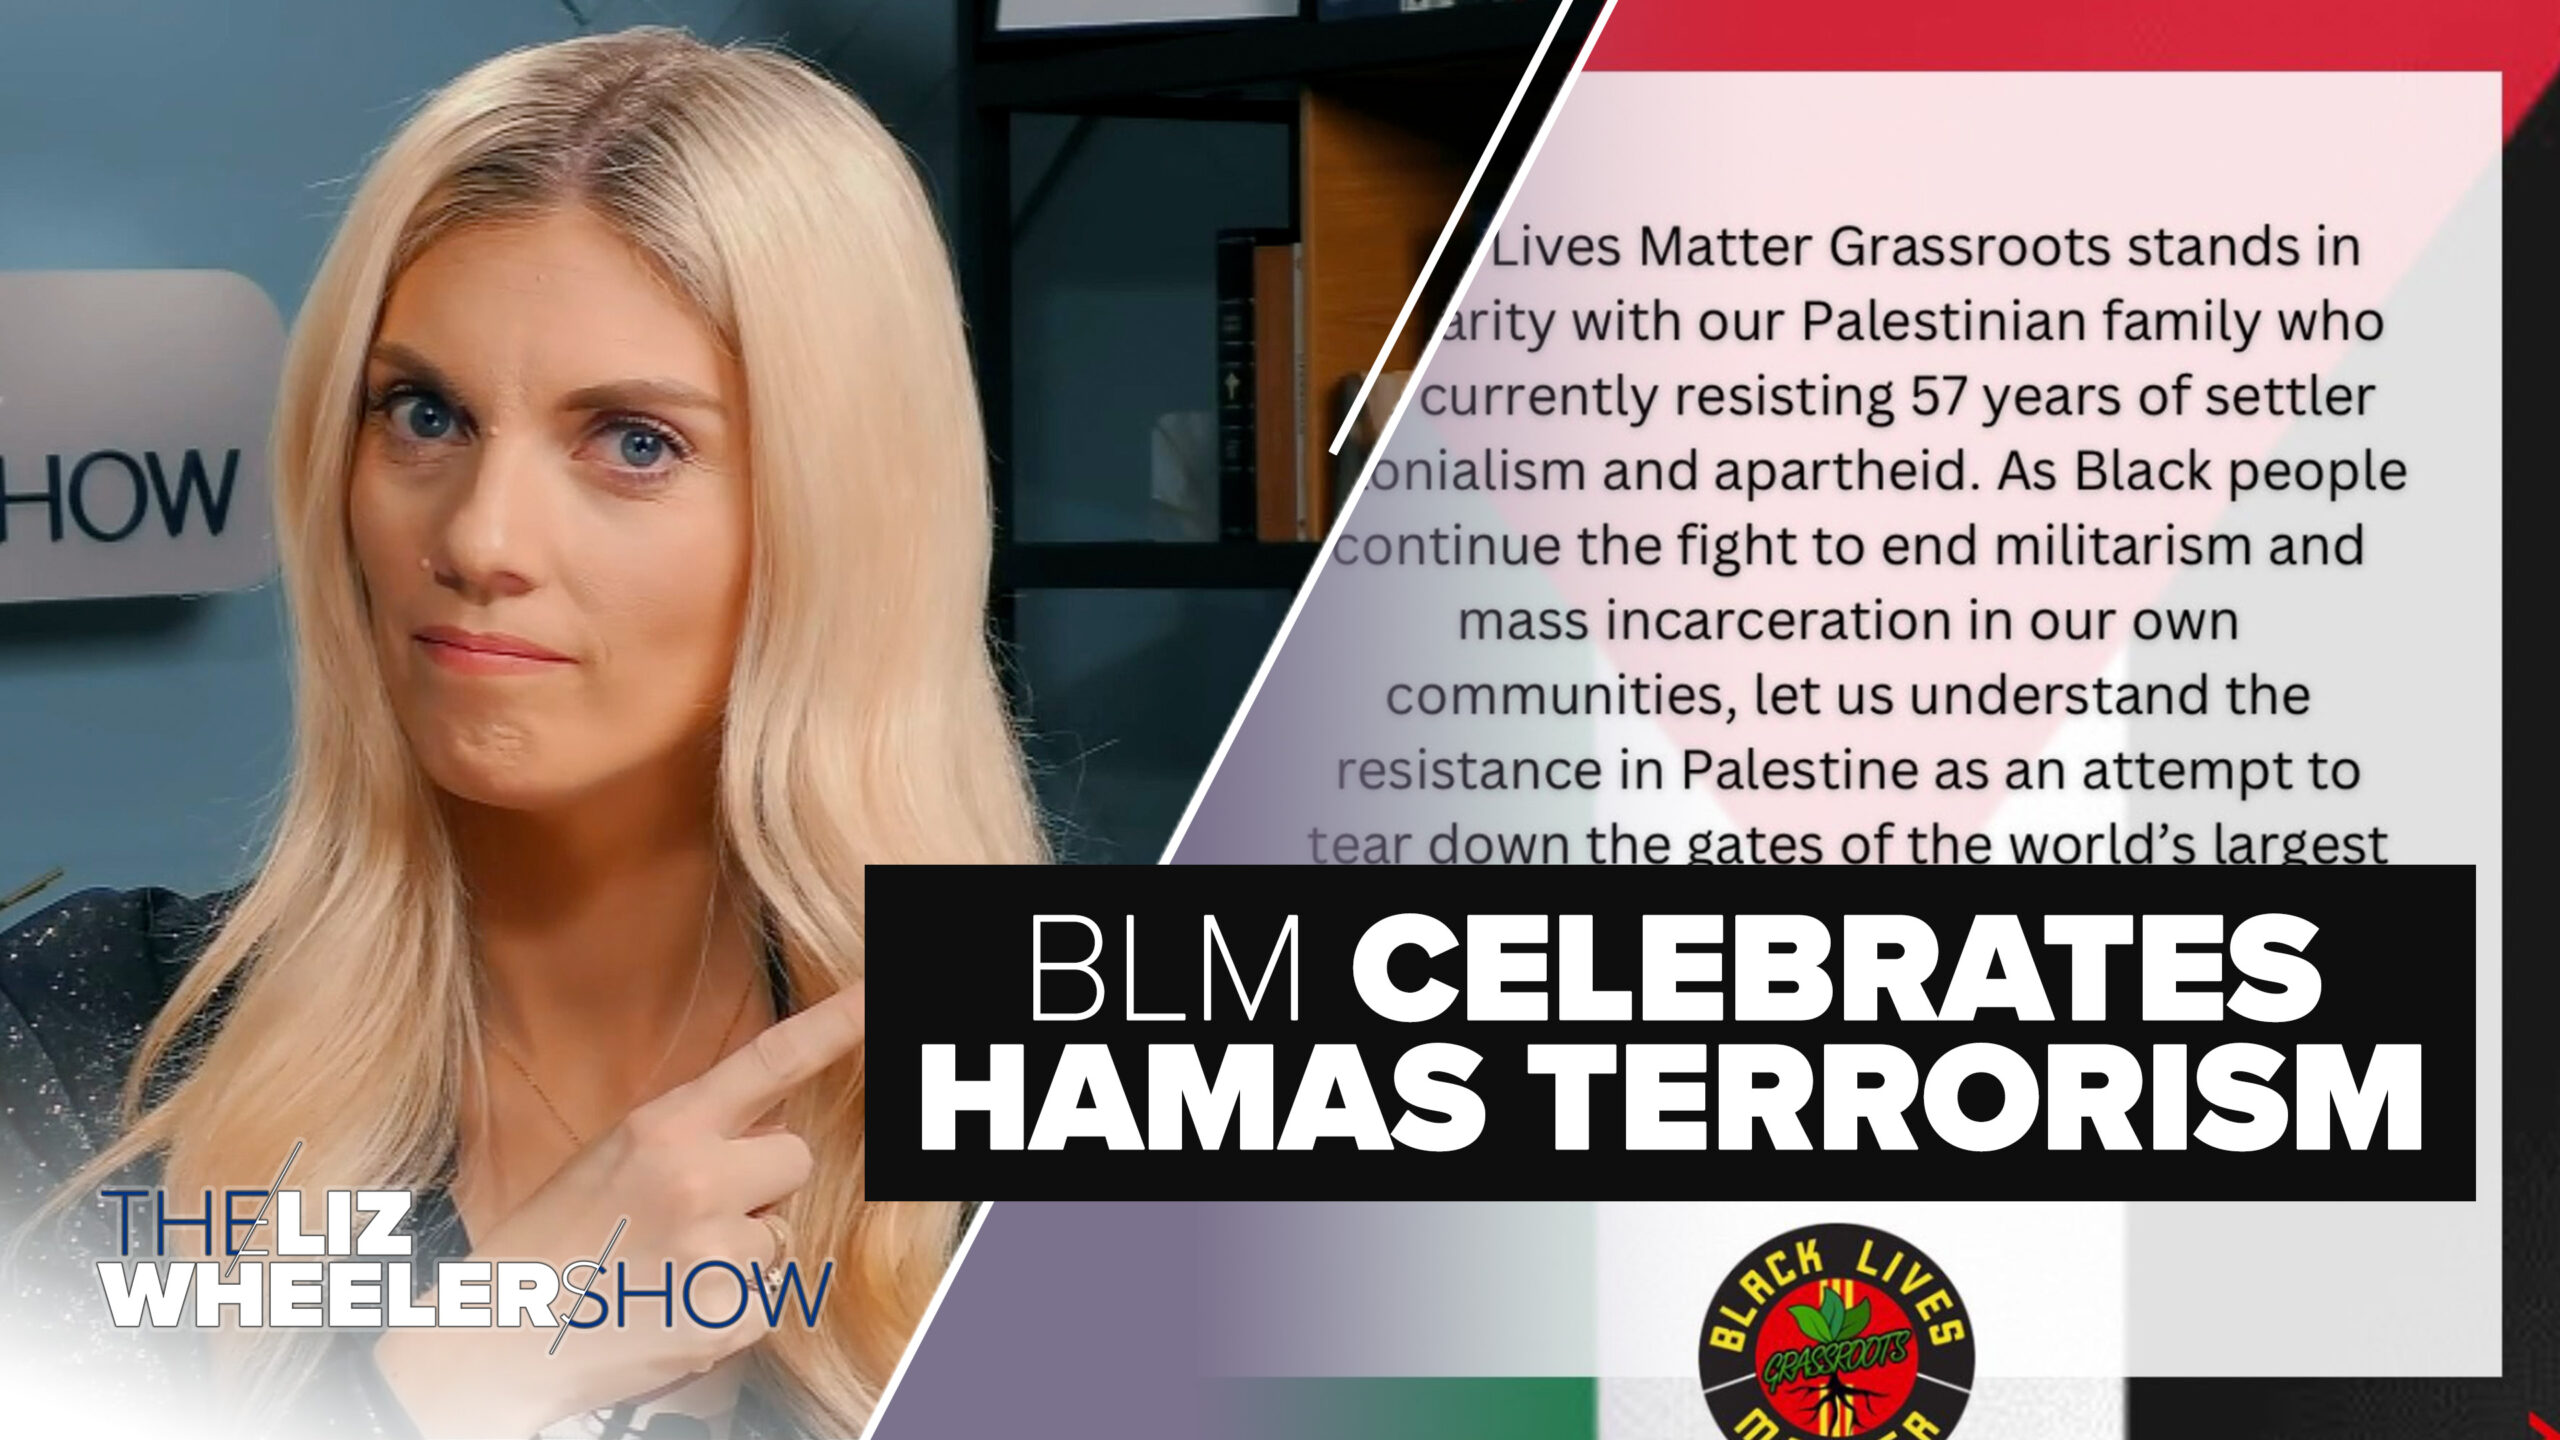 An image of a Black Lives Matter statement supporting the Hamas attacks in Israel appears on Twitter.